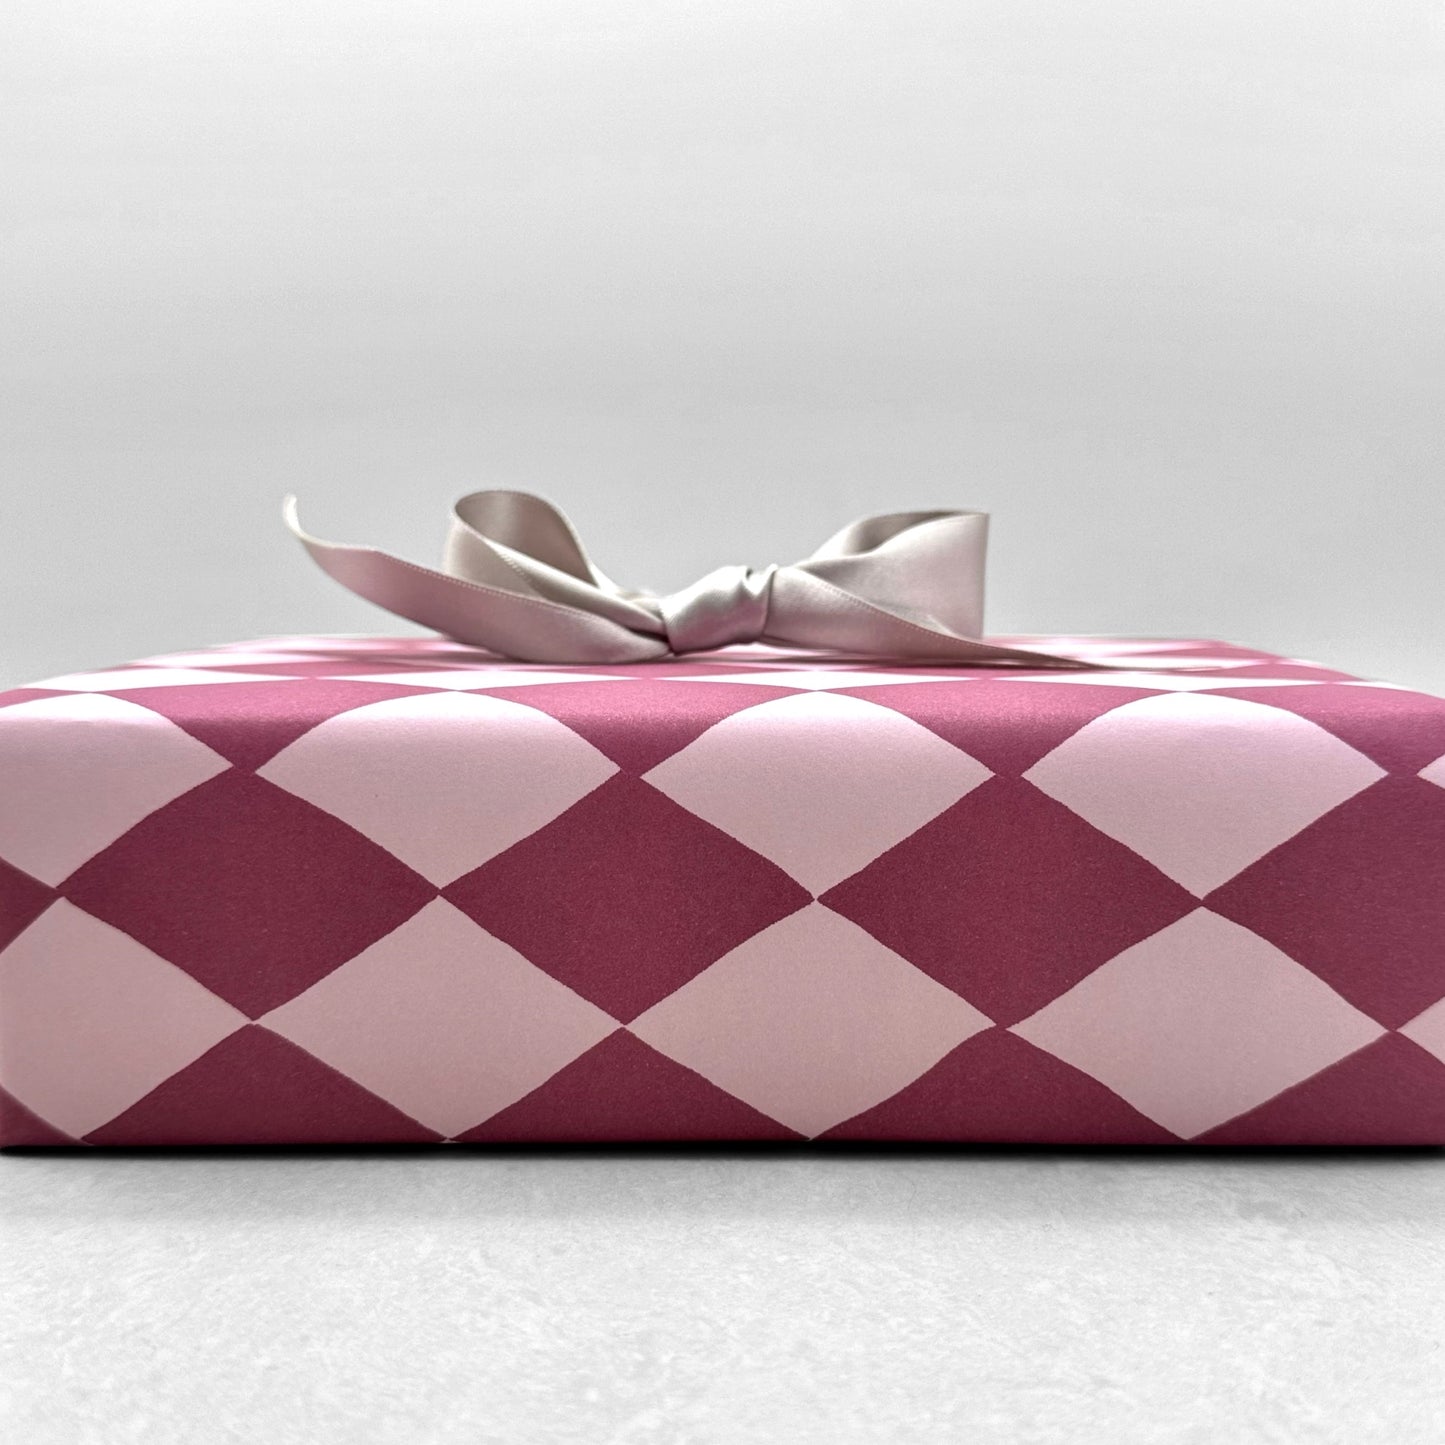 wrapping paper with large diamond design in mauve and pink. Pictured wrapped as a present with a silver bow